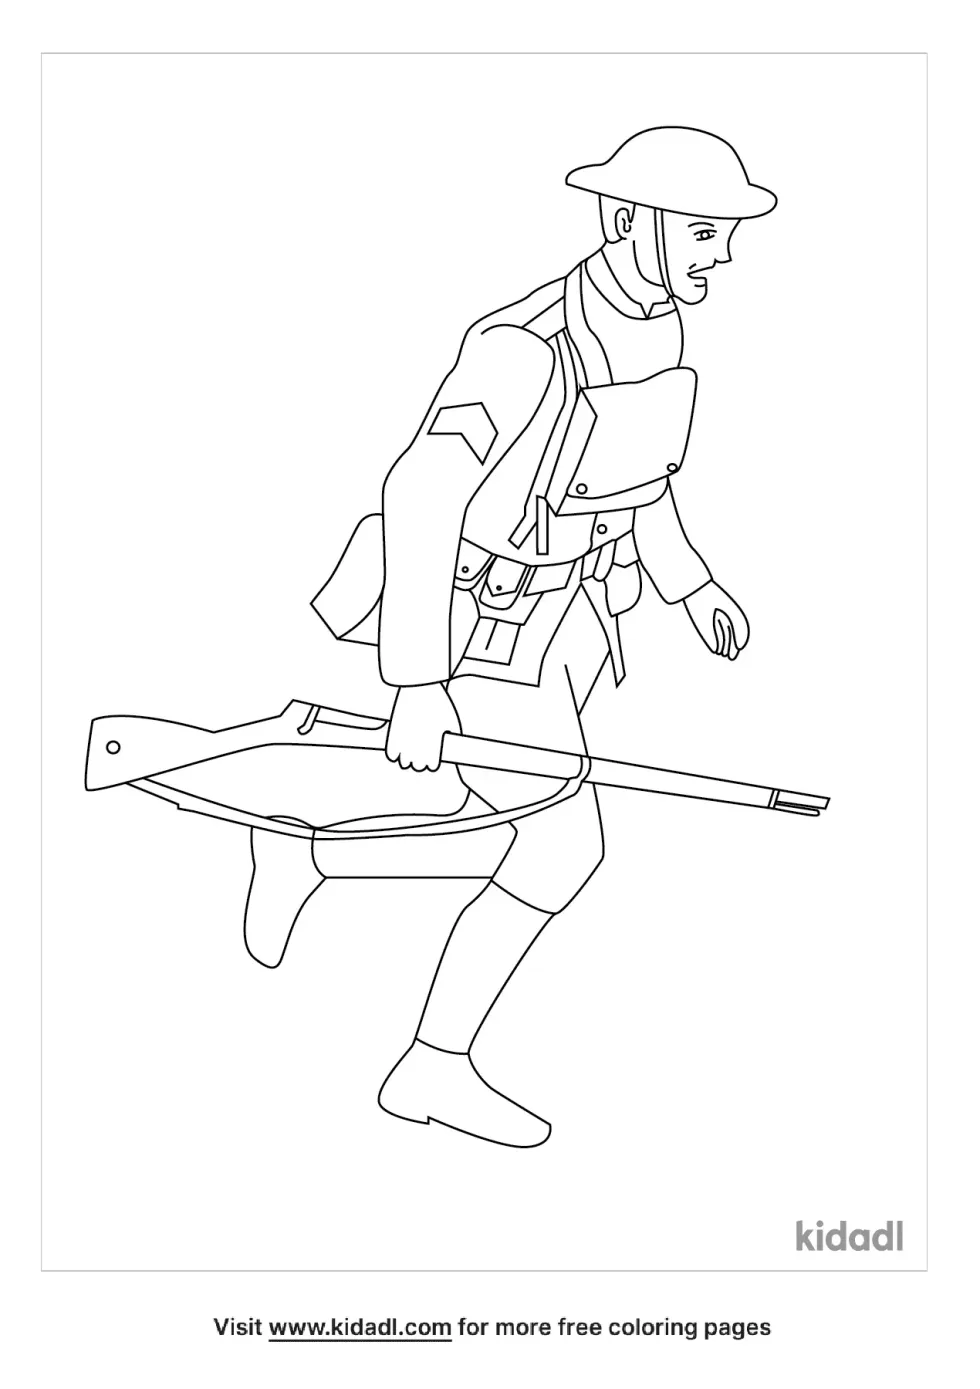 World War 1 Soldier Coloring Page